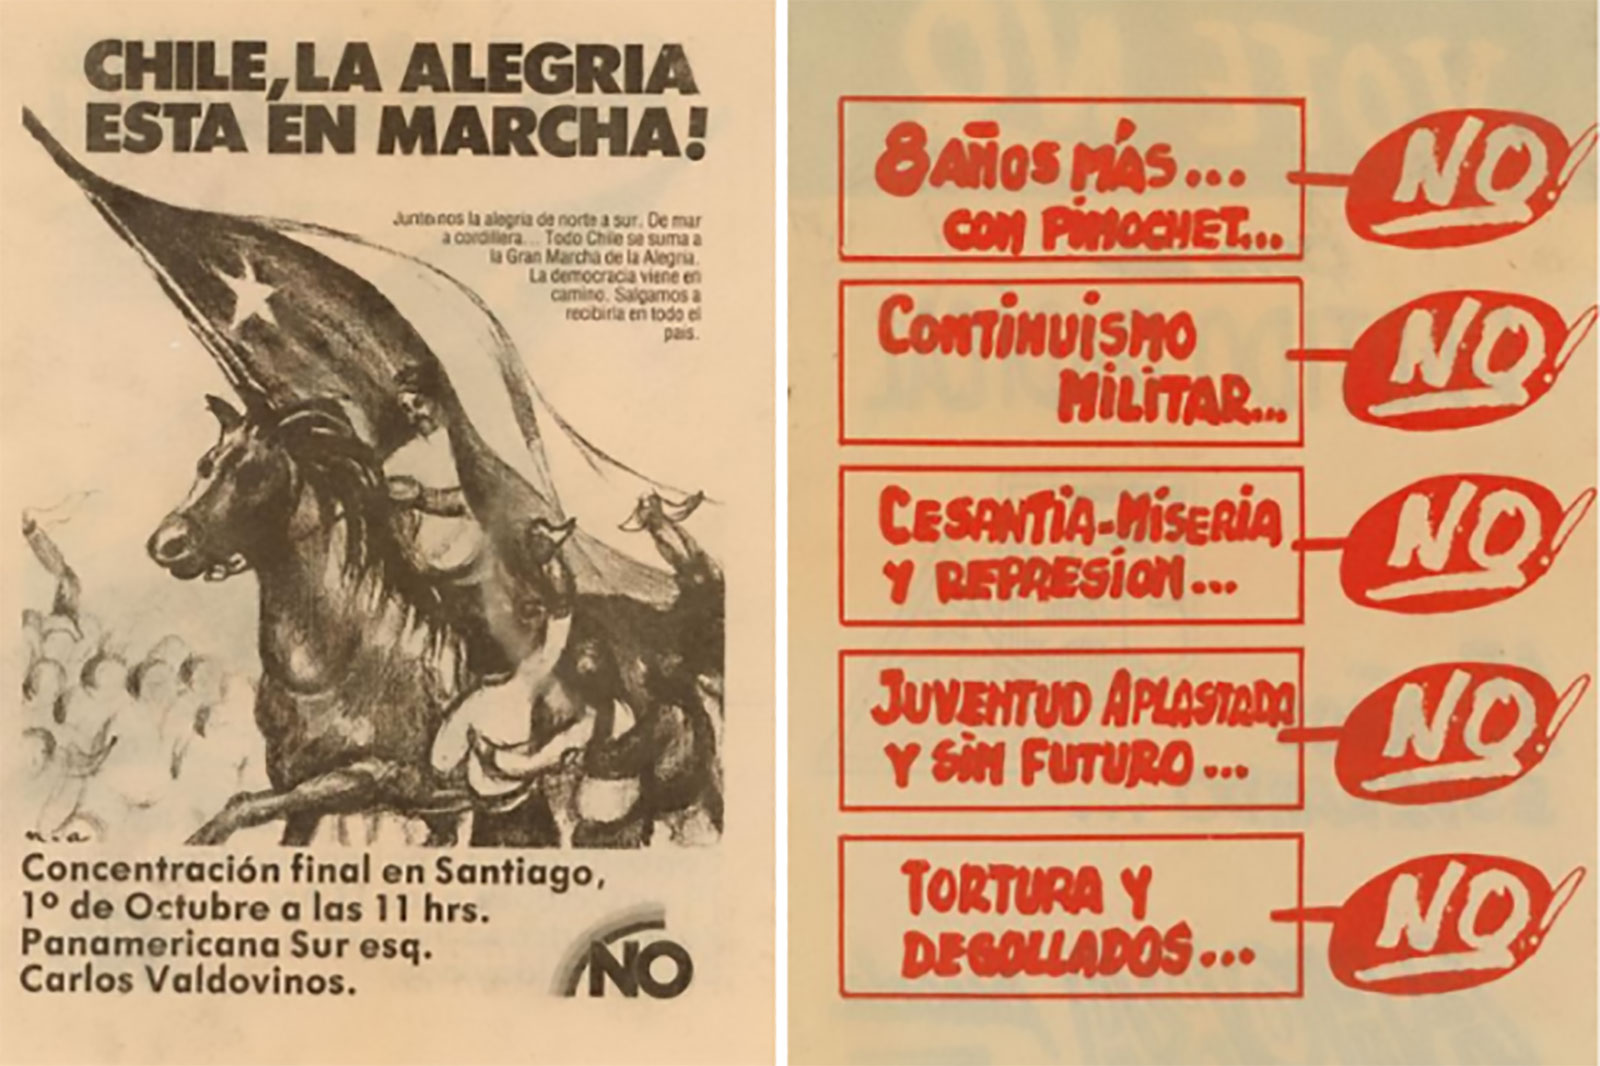 Campaign materials in favor of a "No" vote against Pinochet's continued rule in the 1988 plebiscite. 